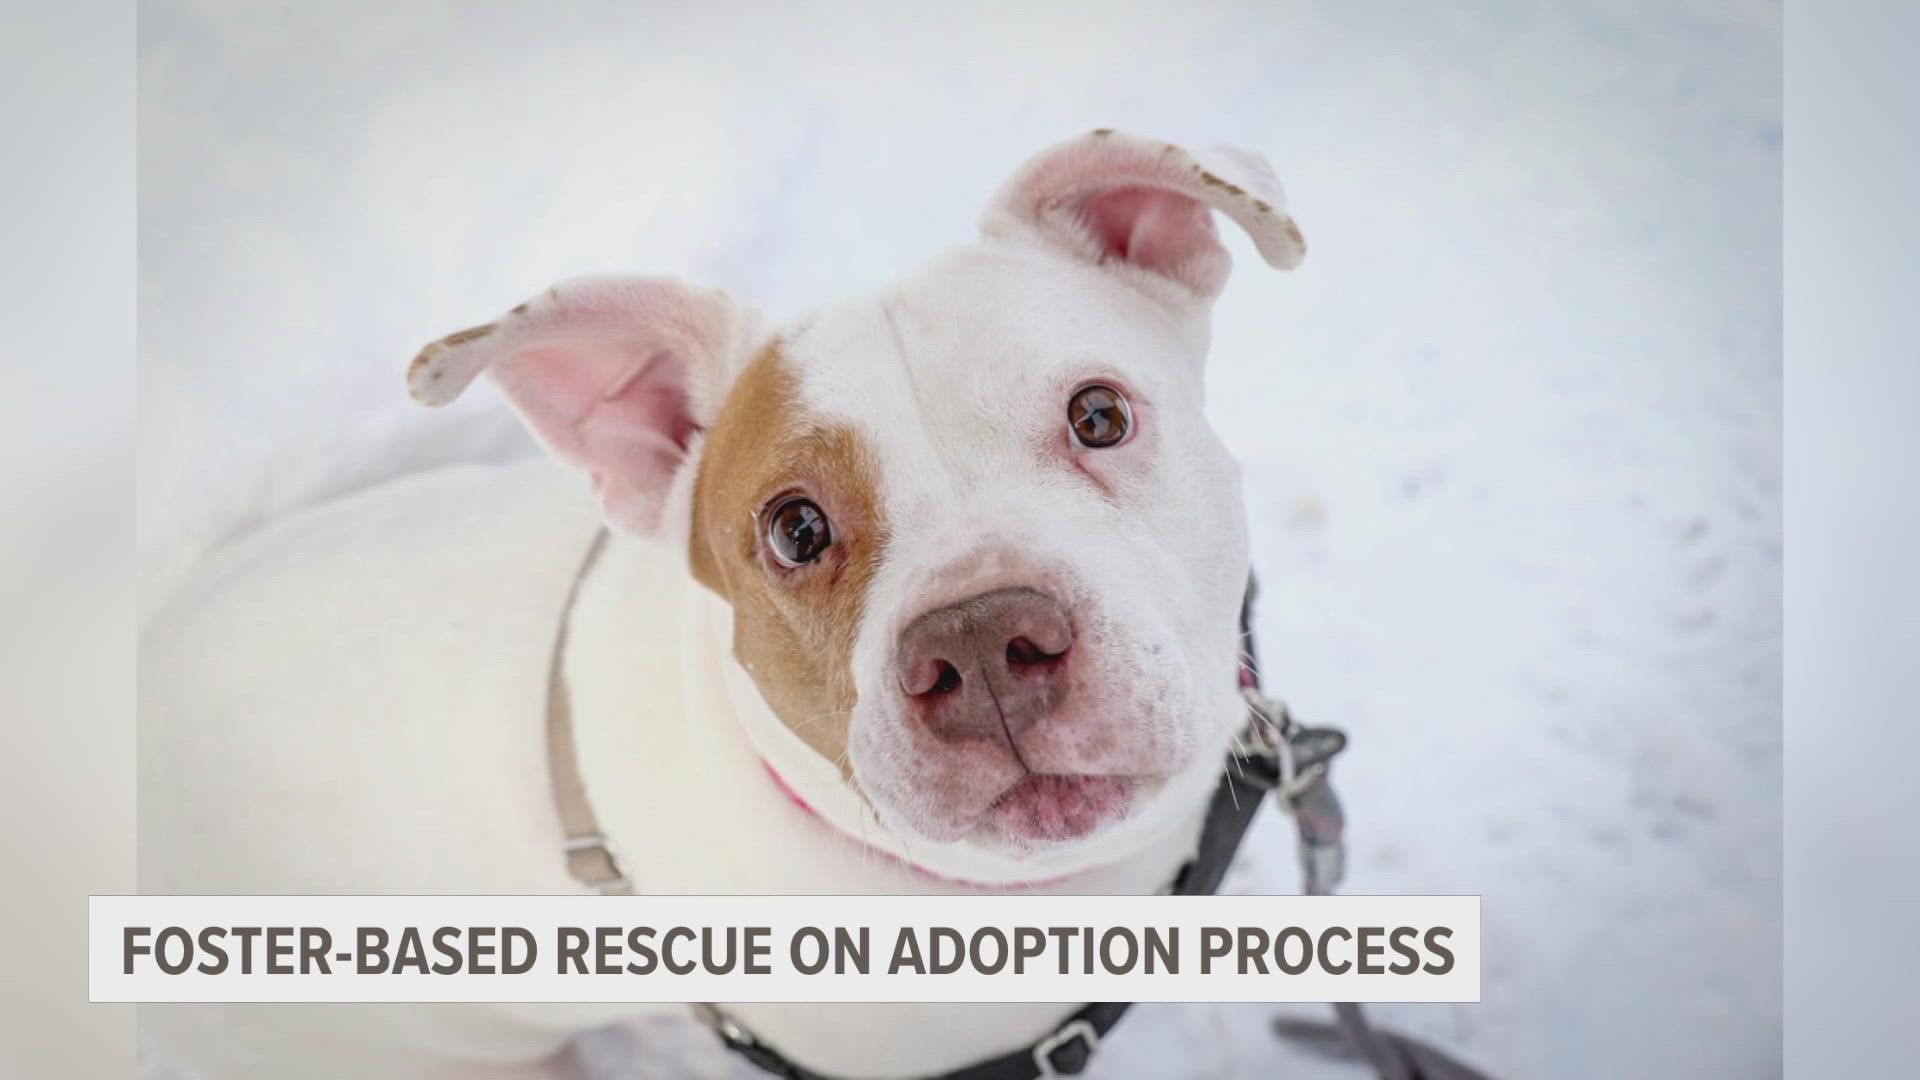 Since 2011, Hearts of Hope Dog Rescue has helped 2,900 animals find their forever homes.